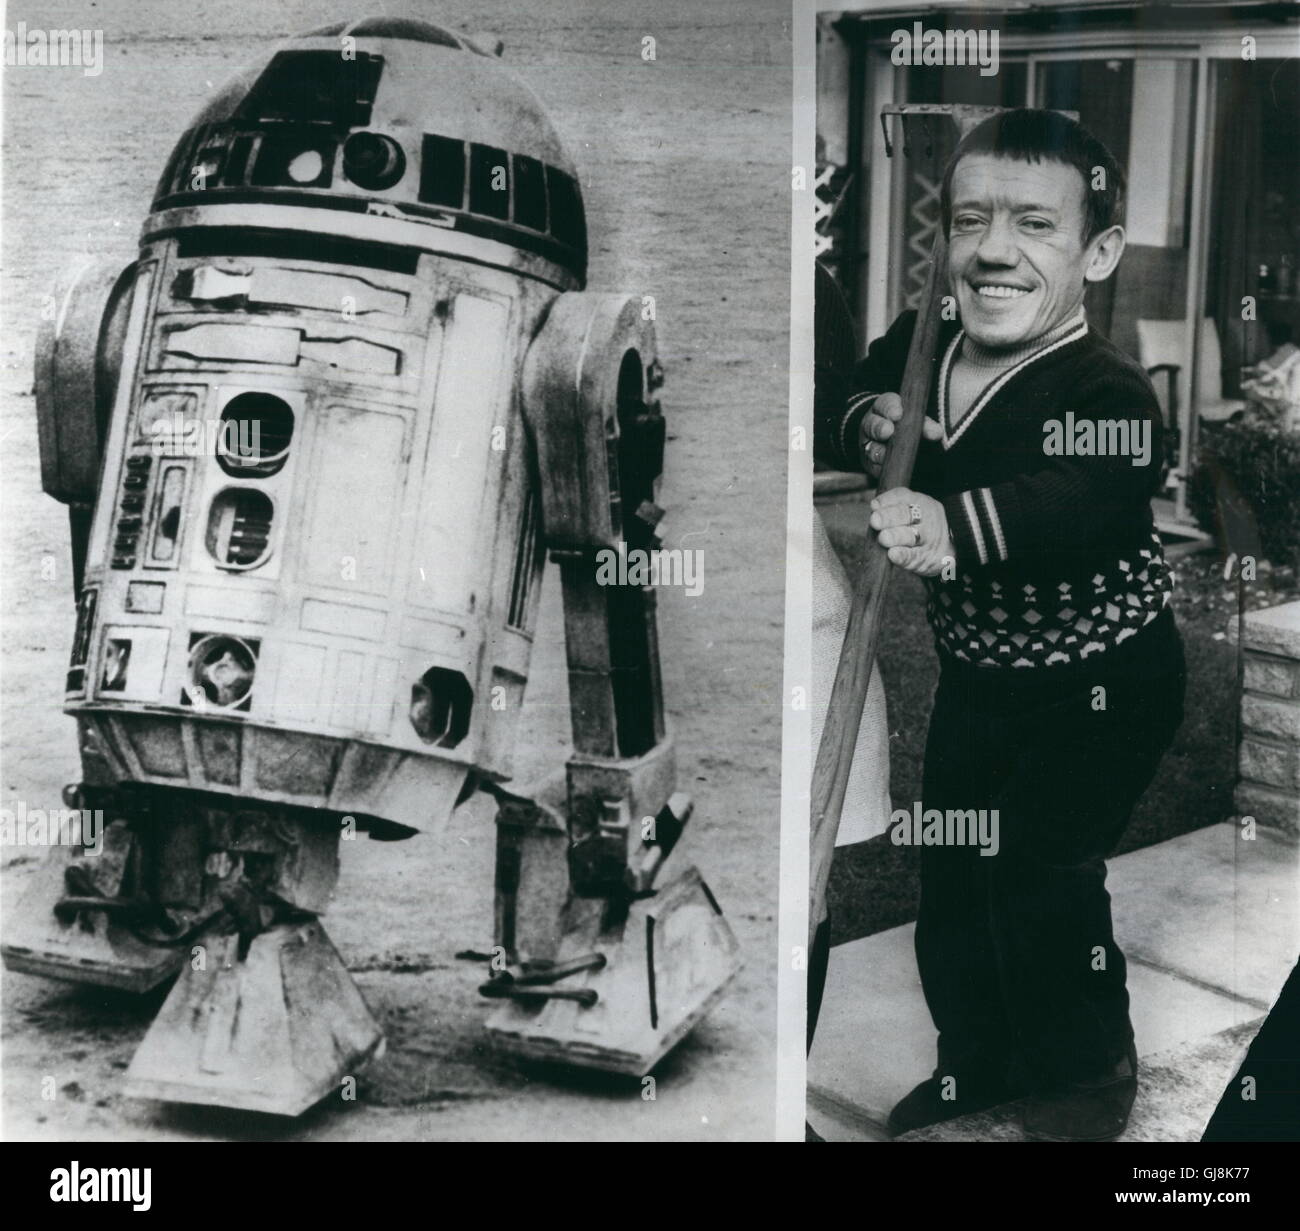 File. 13th Aug, 2016. The British actor who played R2-D2 in the Star Wars films has died at the age of 83 after a long illness. KENNY BAKER, who was 3ft 8in tall, shot to fame in 1977 when he first played the robot character. Baker also appeared in a number of other much-loved films in the 1980s, including The Elephant Man, Time Bandits and Flash Gordon. Pictured: Jan. 1, 1970 - 'Star Wars' Left Artoo Deeto the brave Hero Robot in the film 'Star Wars' and right, Kenny Baker, the man who was brave enough to stand up to the tremendous strain during the shooting of the film in all conditions i Stock Photo